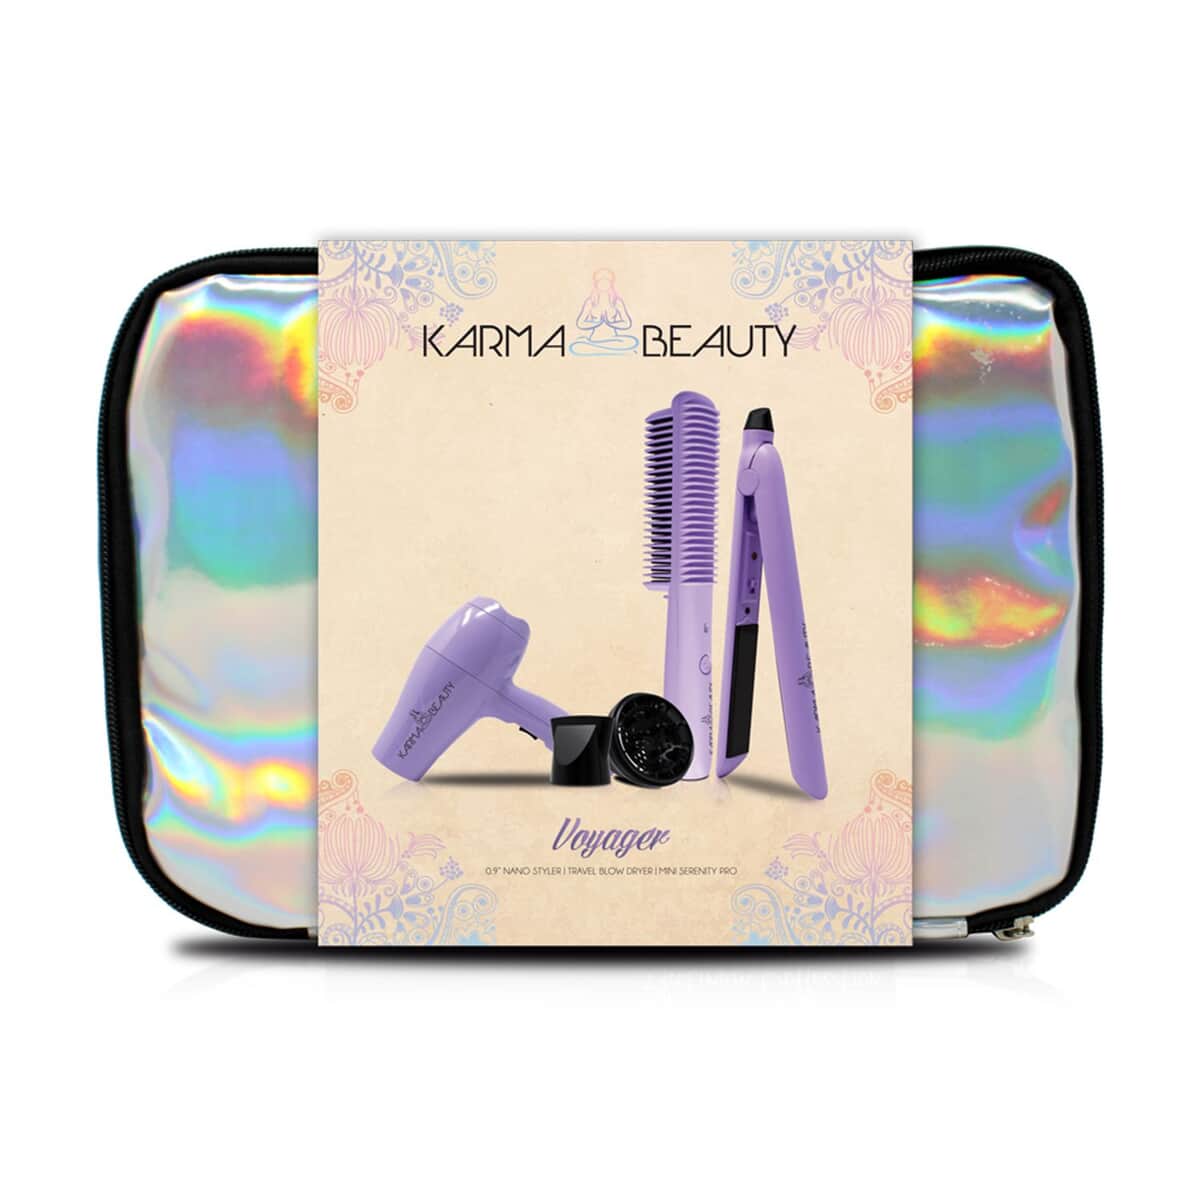 Karma Beauty Lilac Voyager Hair Styling Kit For All Hair Type, 3 Piece Hair Styler Kit of 1 Blow Dryer, 1 Serenity Pro Hair Comb, 1 Nano Styler Flat Iron With Storage Case image number 0